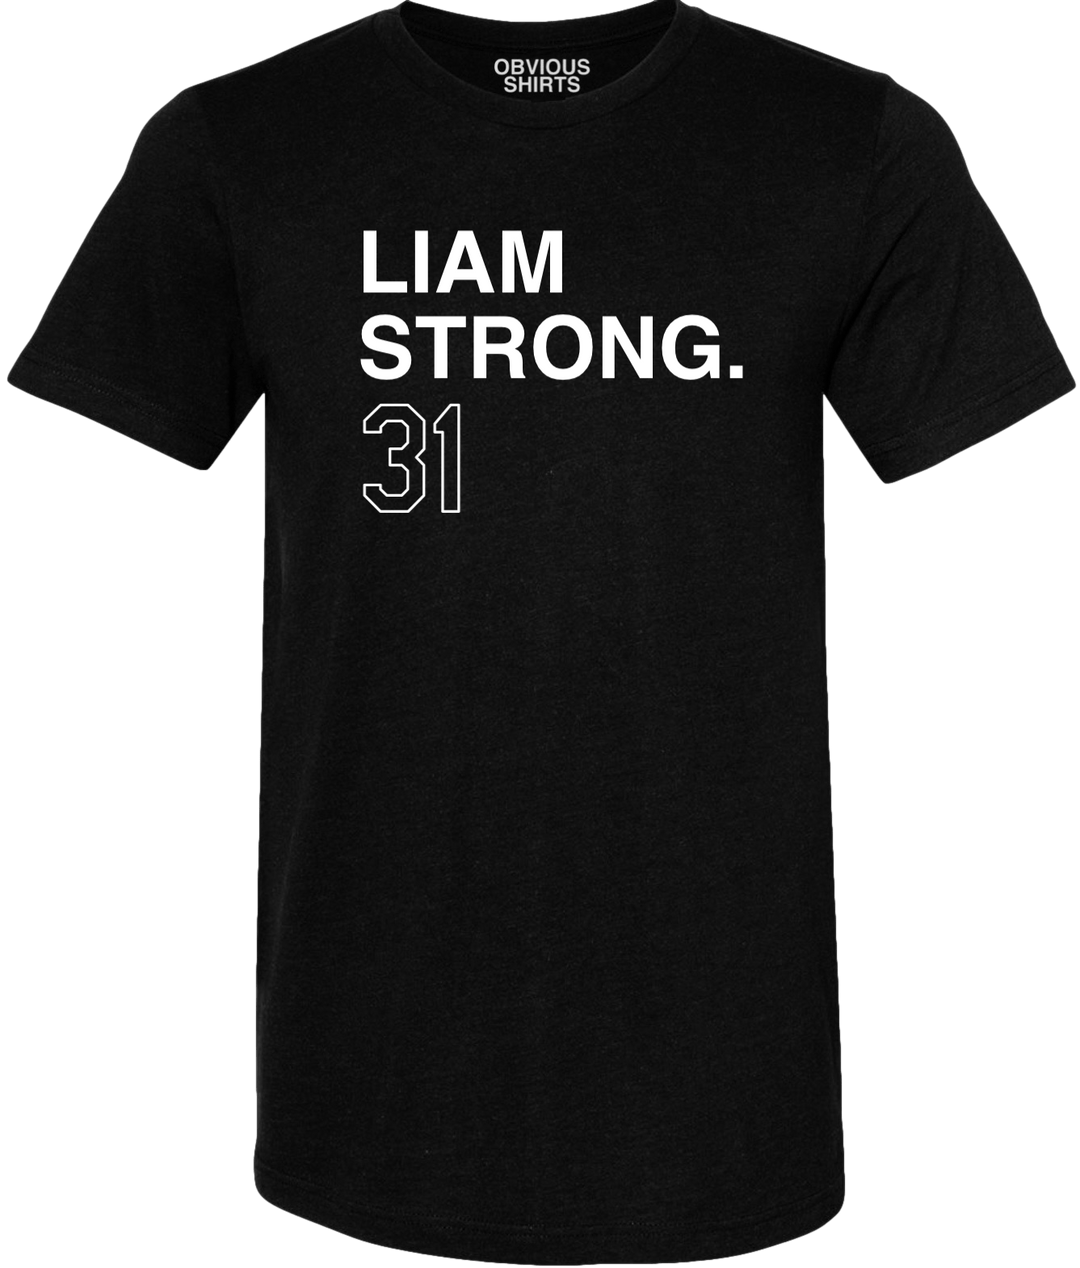 LIAM STRONG. - OBVIOUS SHIRTS